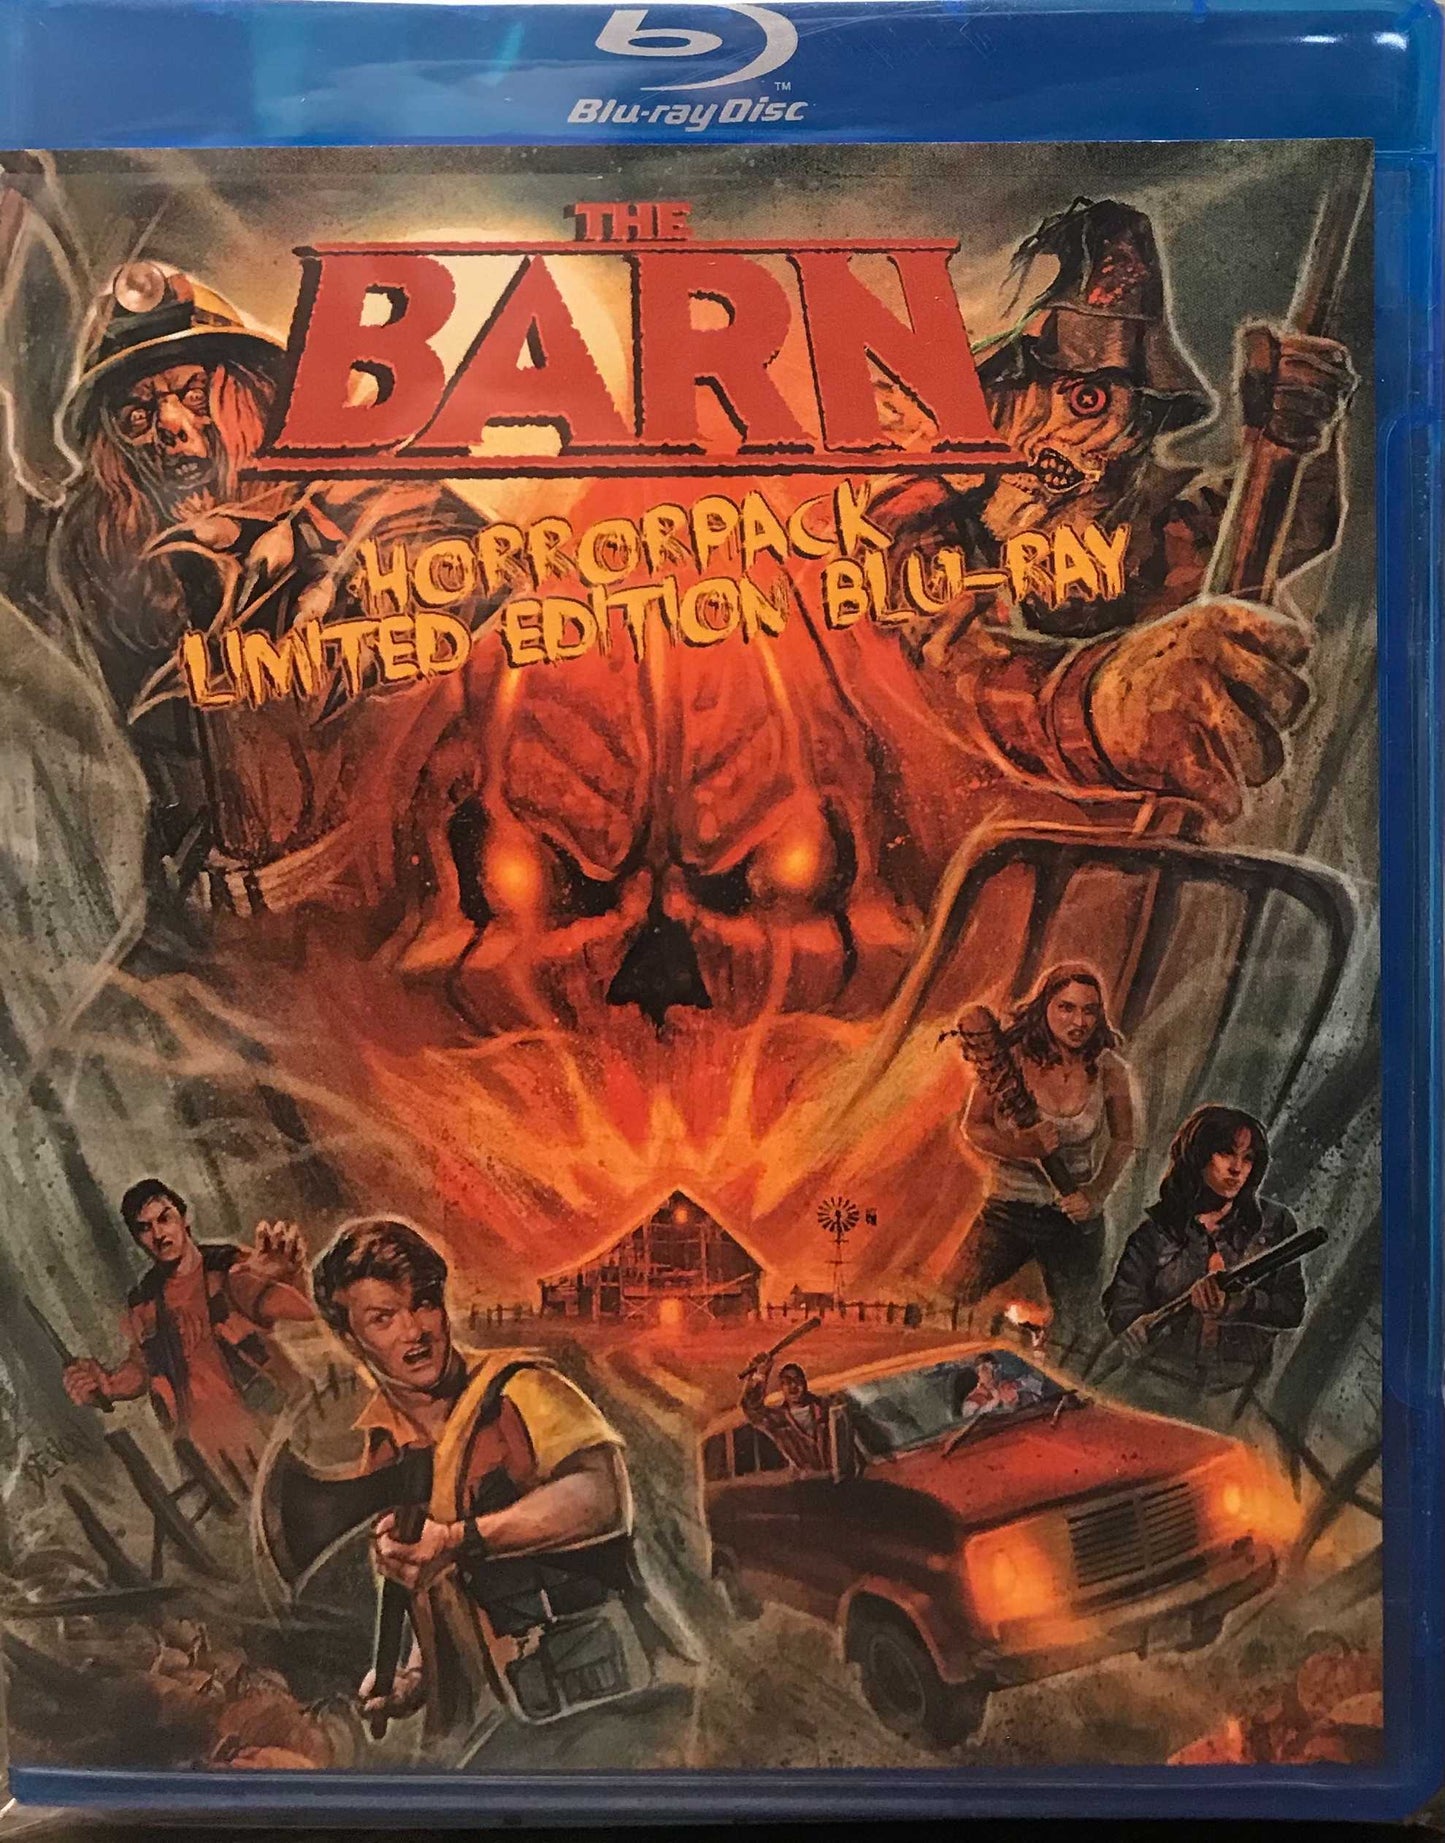 The Barn - HorrorPack Limited Edition Blu-ray #52